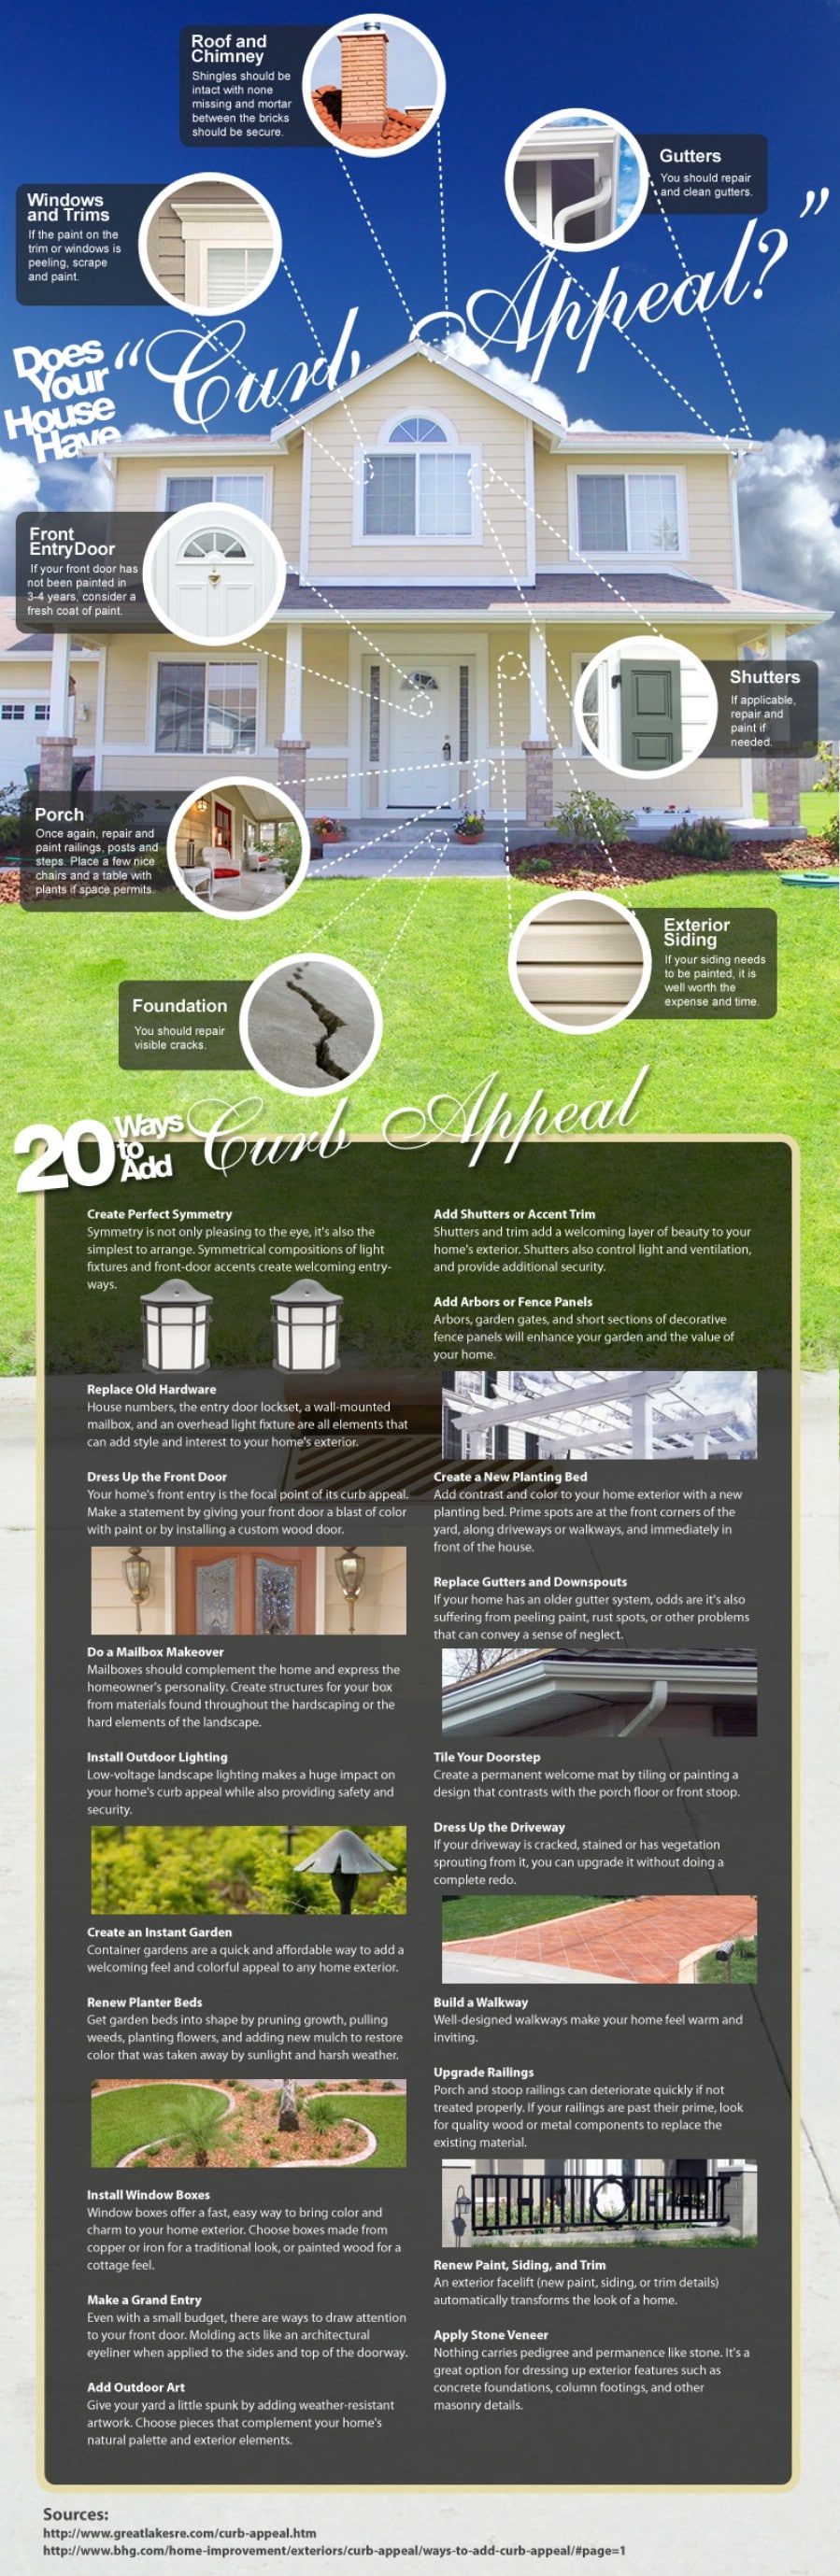 47. Easy Curb Appeal Improving Hacks - 50 Amazingly Clever Cheat Sheets To Simplify Home Decorating Projects